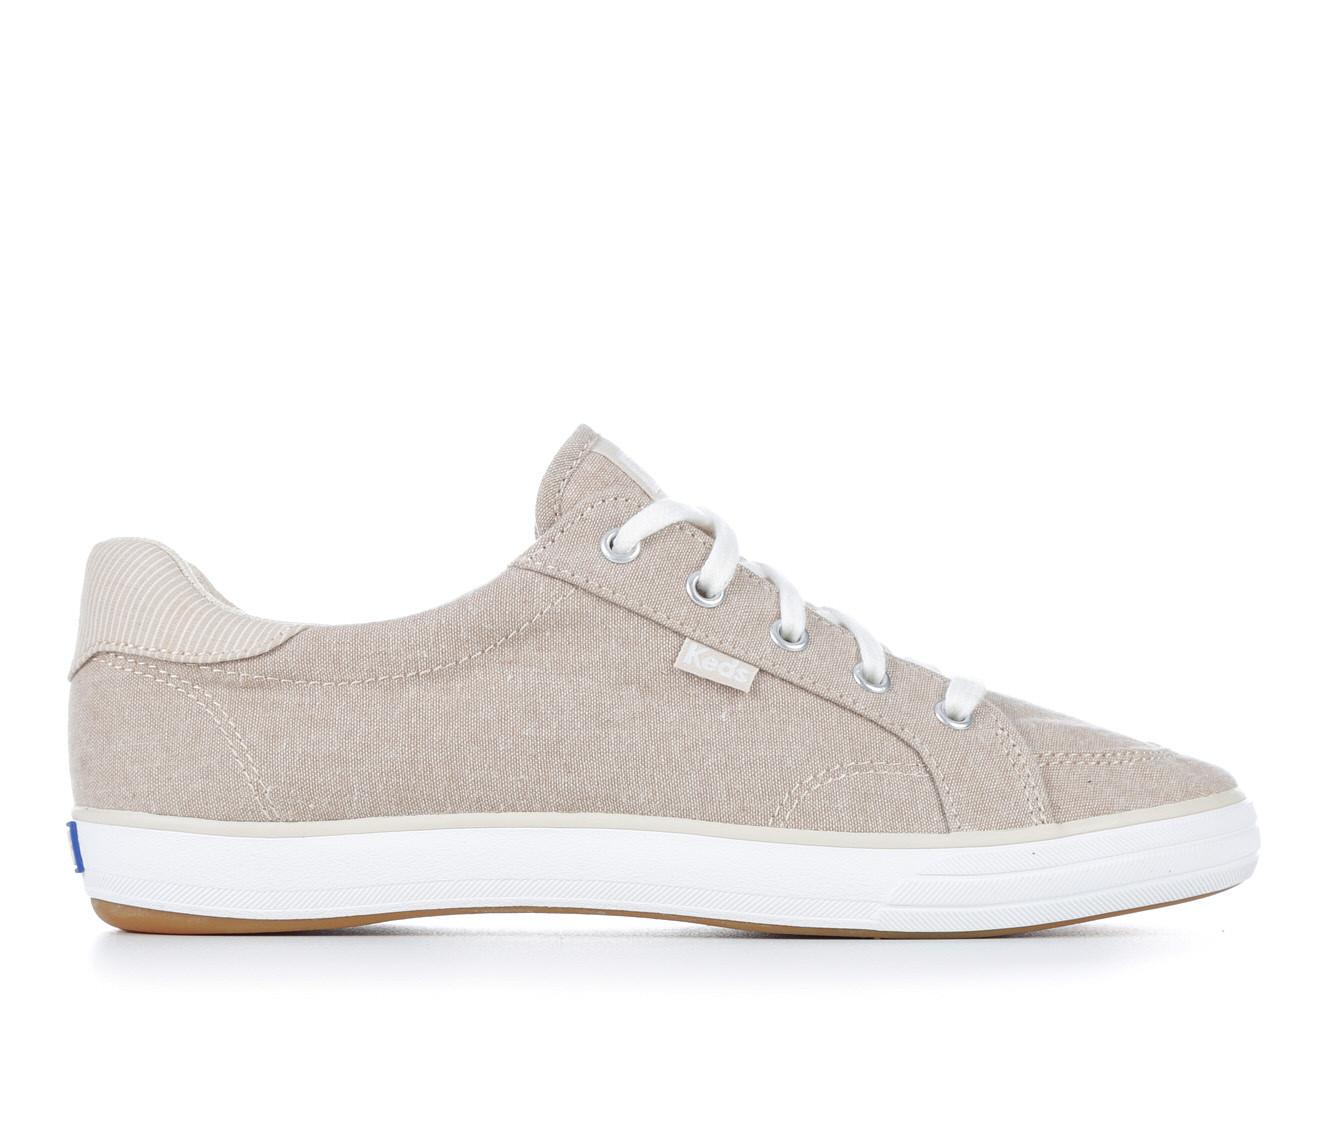 Women's Keds Center III Chambray Sneakers